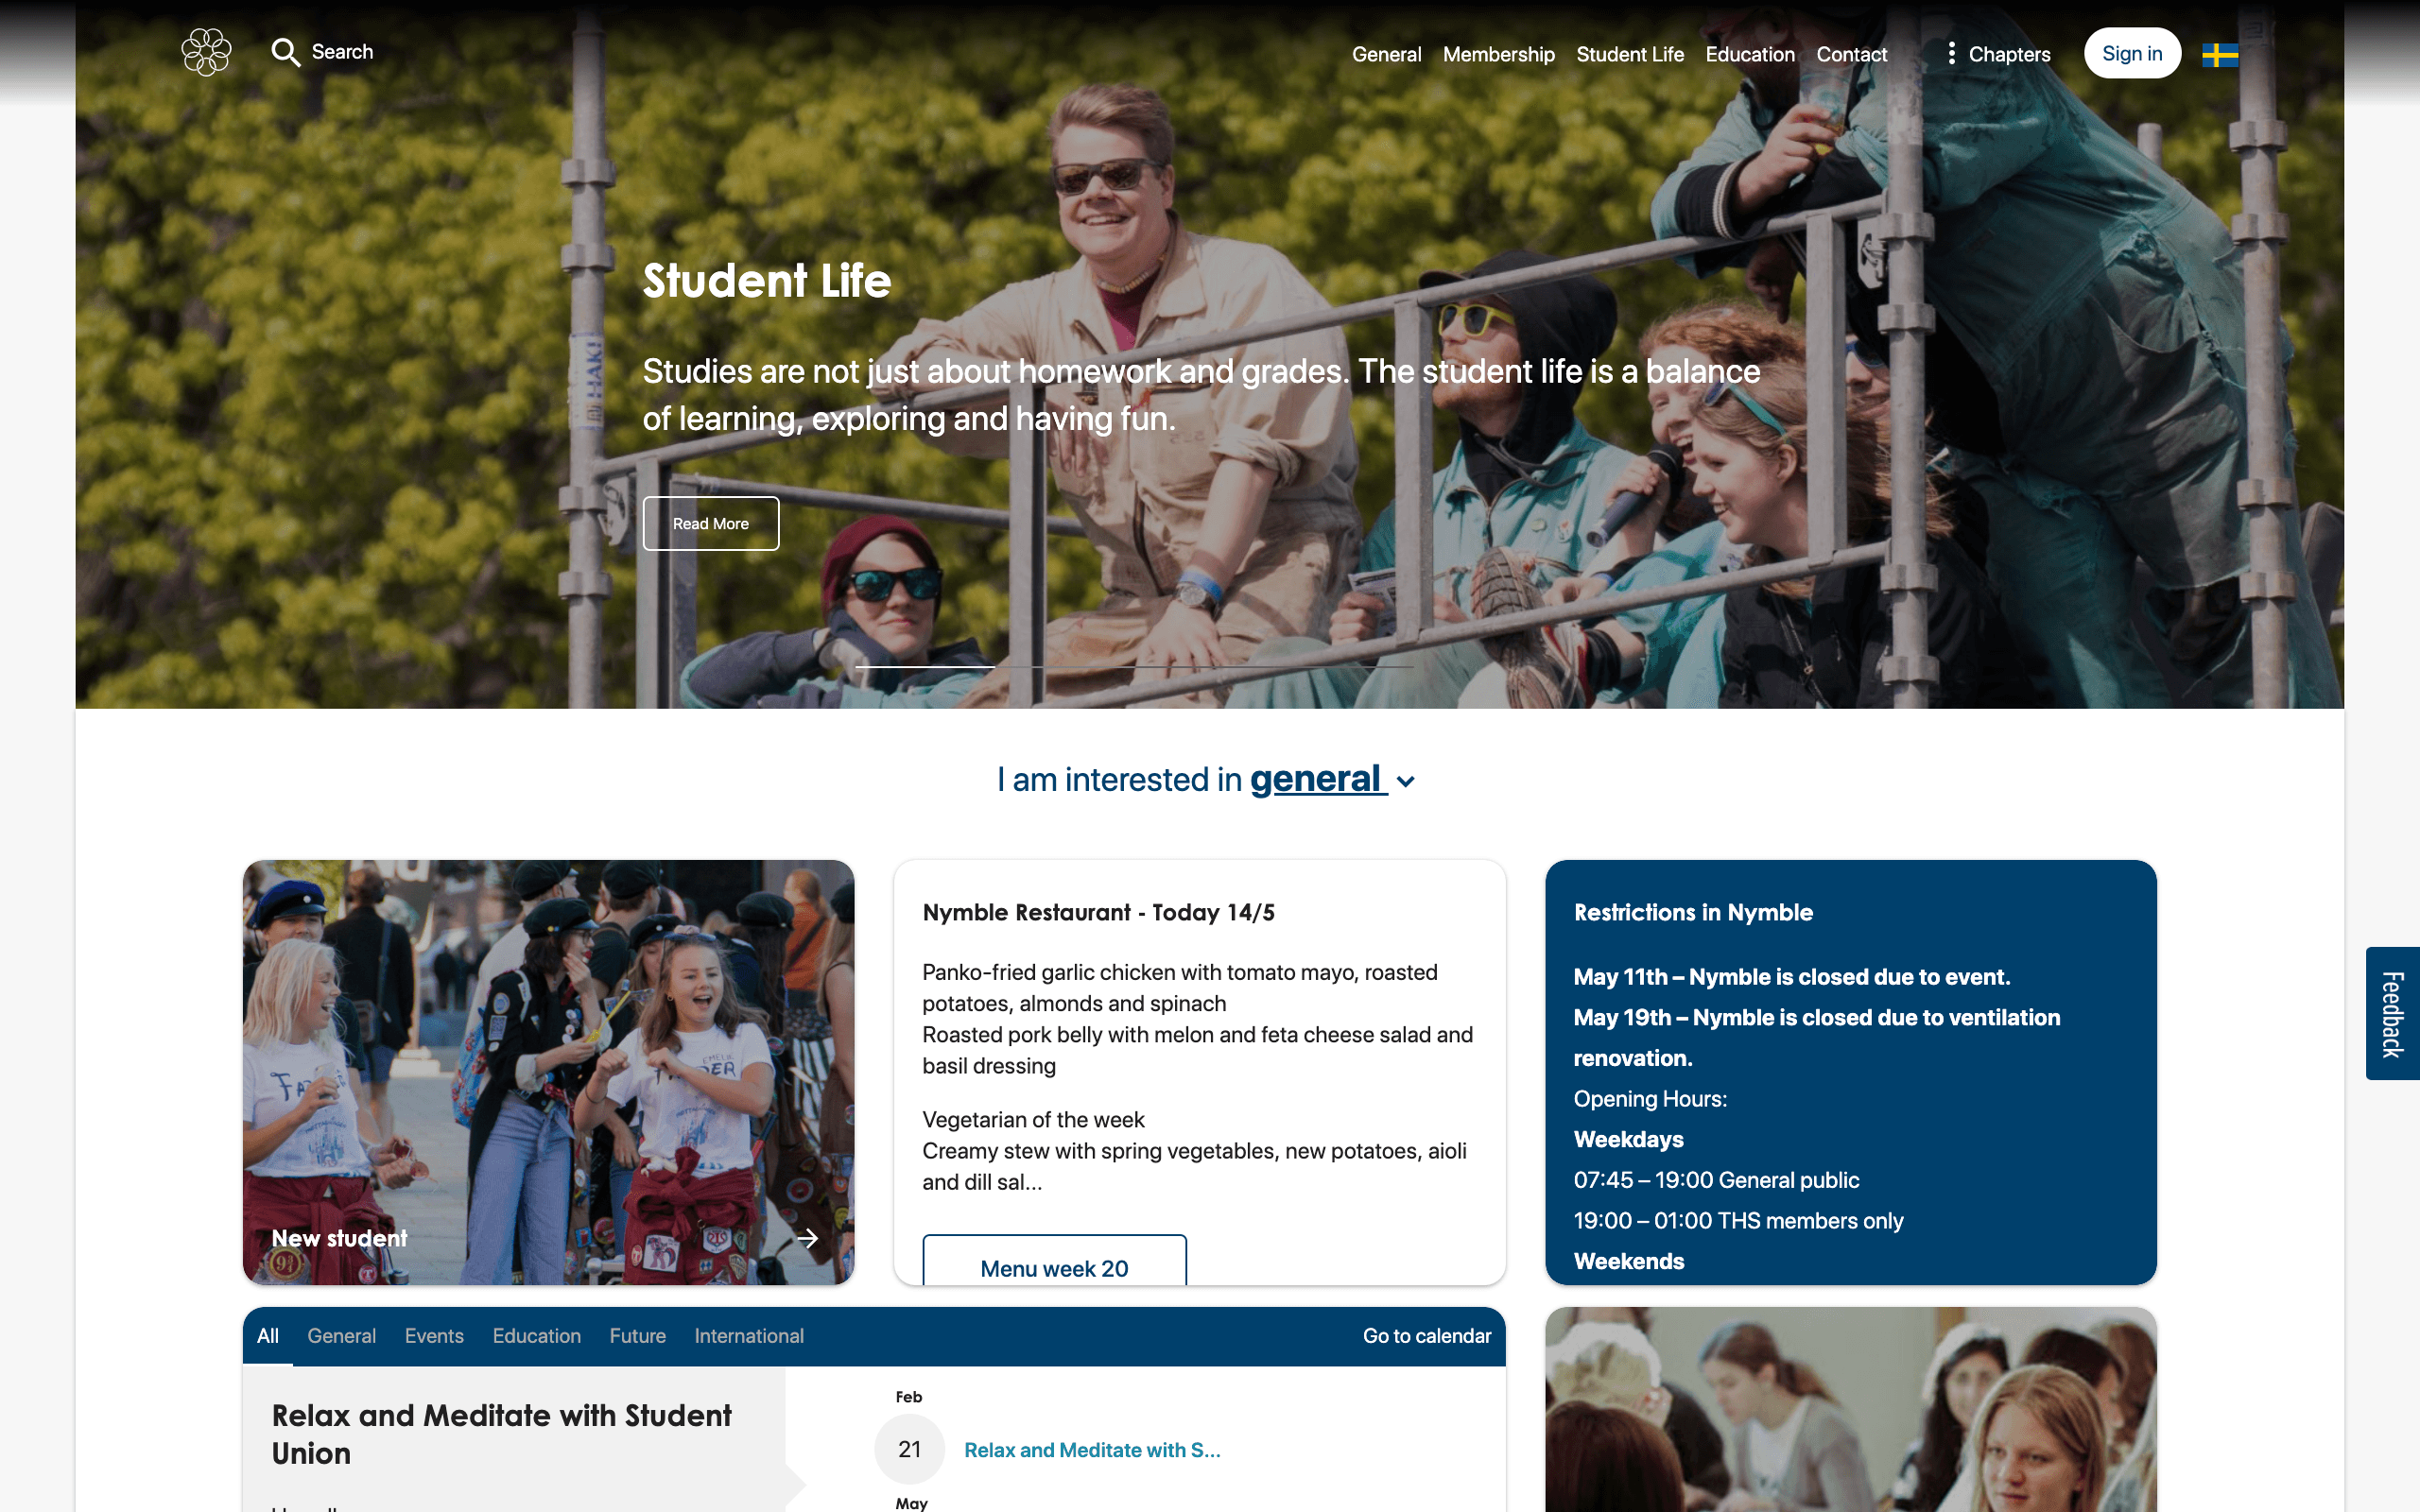 Screenshot of a website with students participating in campus activities and interacting with each other.